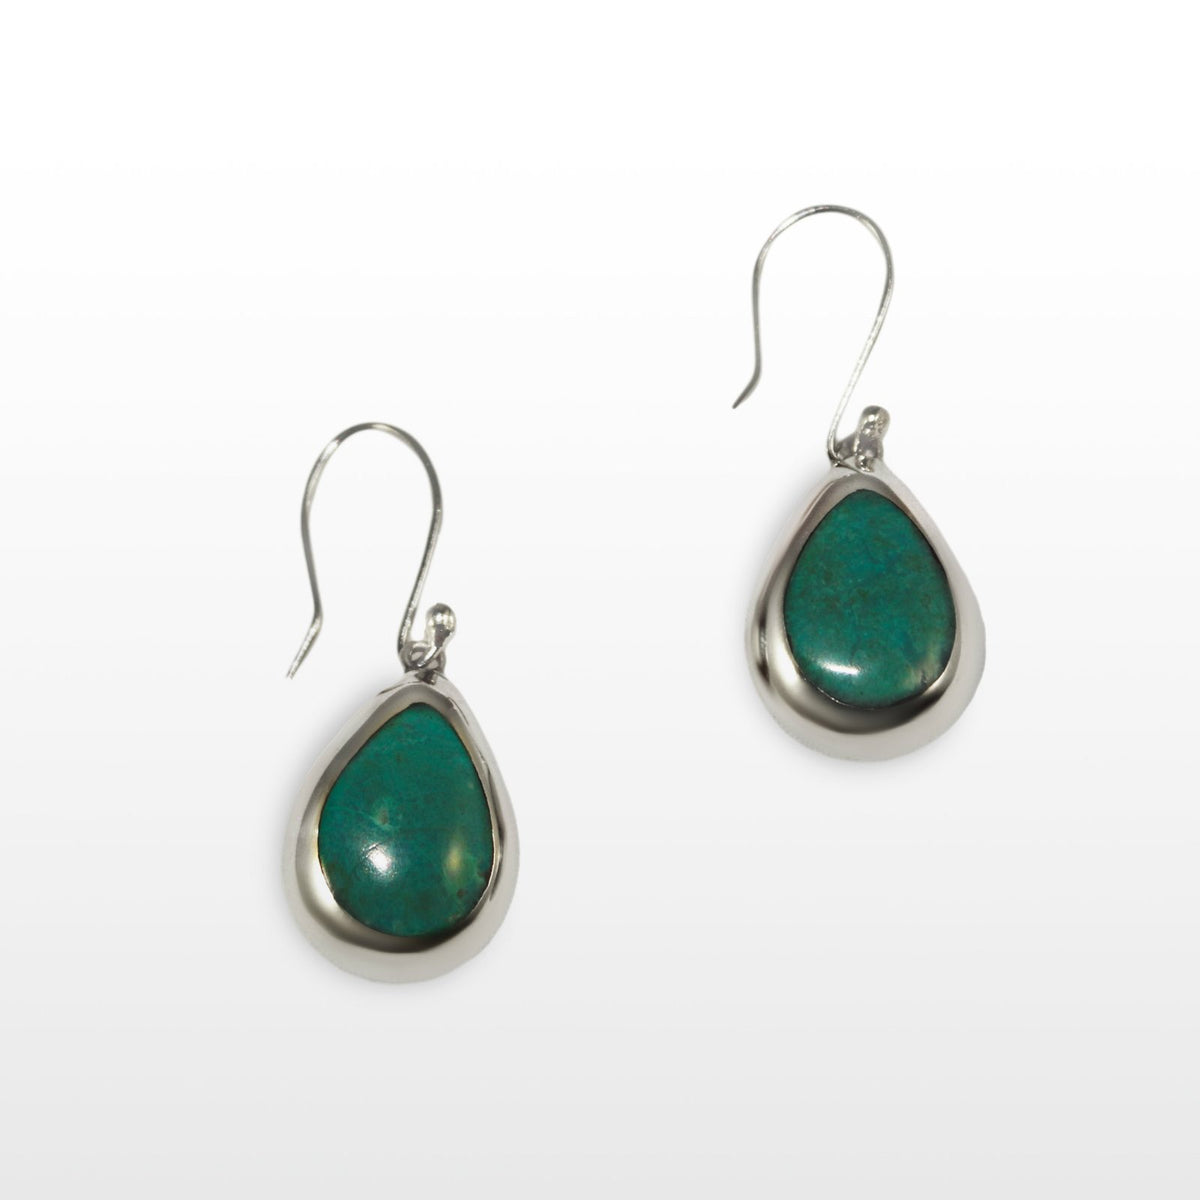 Chrysocolla Sterling Silver Flower Pendant Necklace &amp; Earrings Set - Qinti - The Peruvian Shop